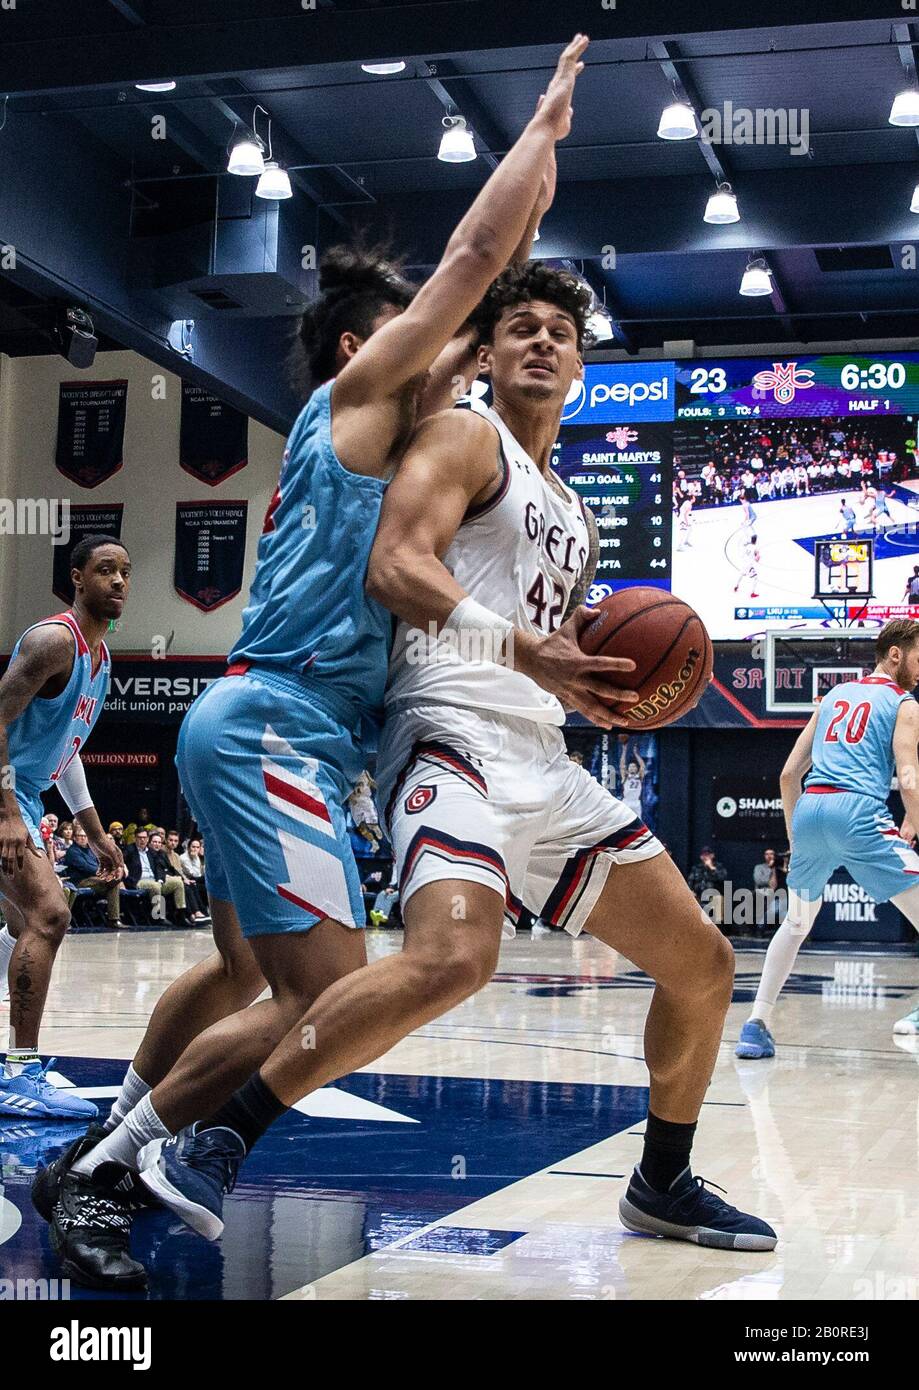 McKeon Pavilion Moraga Calif, USA. 20th Feb, 2020. CA U.S.A. St. Mary's Gaels forward Dan Fotu (42) fights for position in the paint during the NCAA Men's Basketball game between Loyola Marymount Lions and the Saint Mary's Gaels 57-51 win at McKeon Pavilion Moraga Calif. Thurman James/CSM/Alamy Live News Stock Photo